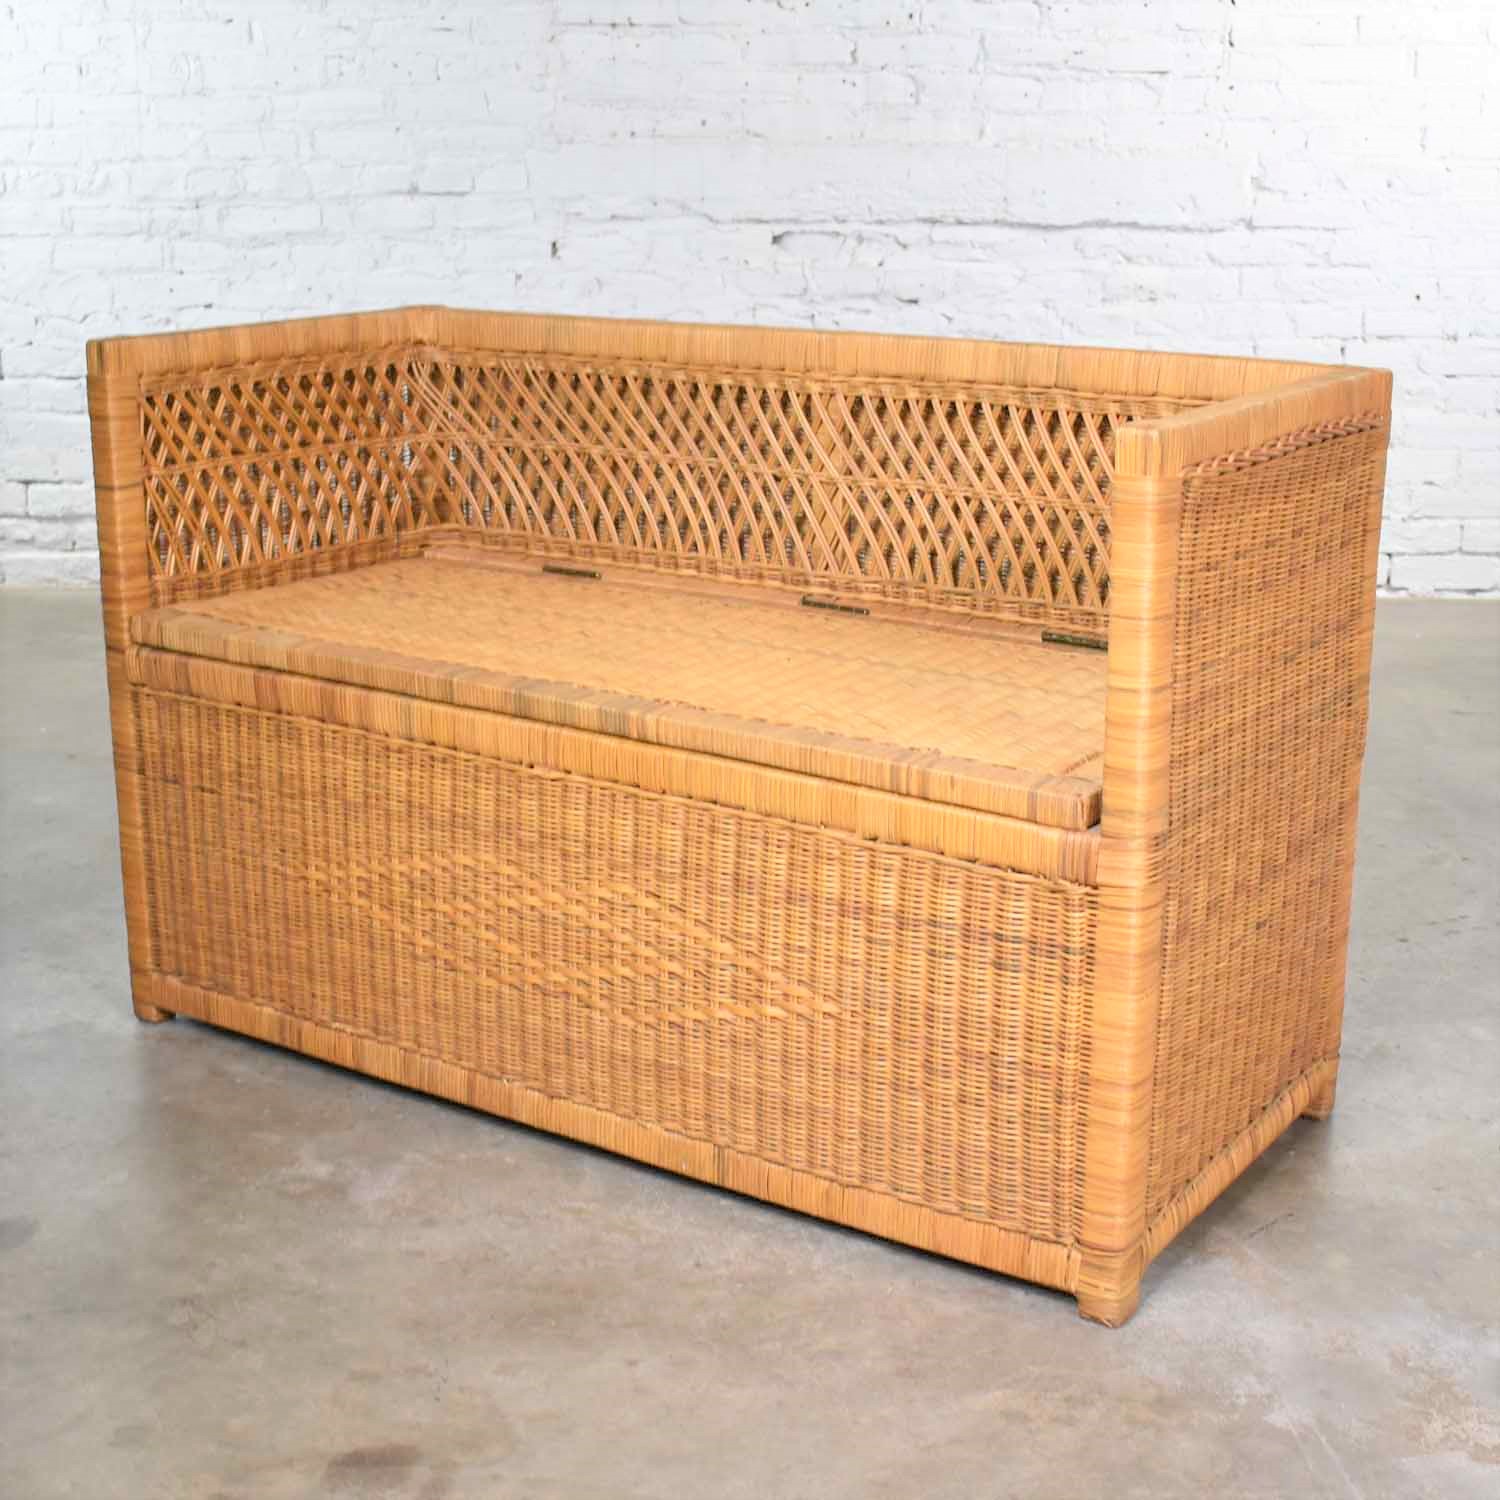 Vintage Modern Wicker Bench Settee with Trunk Style Storage